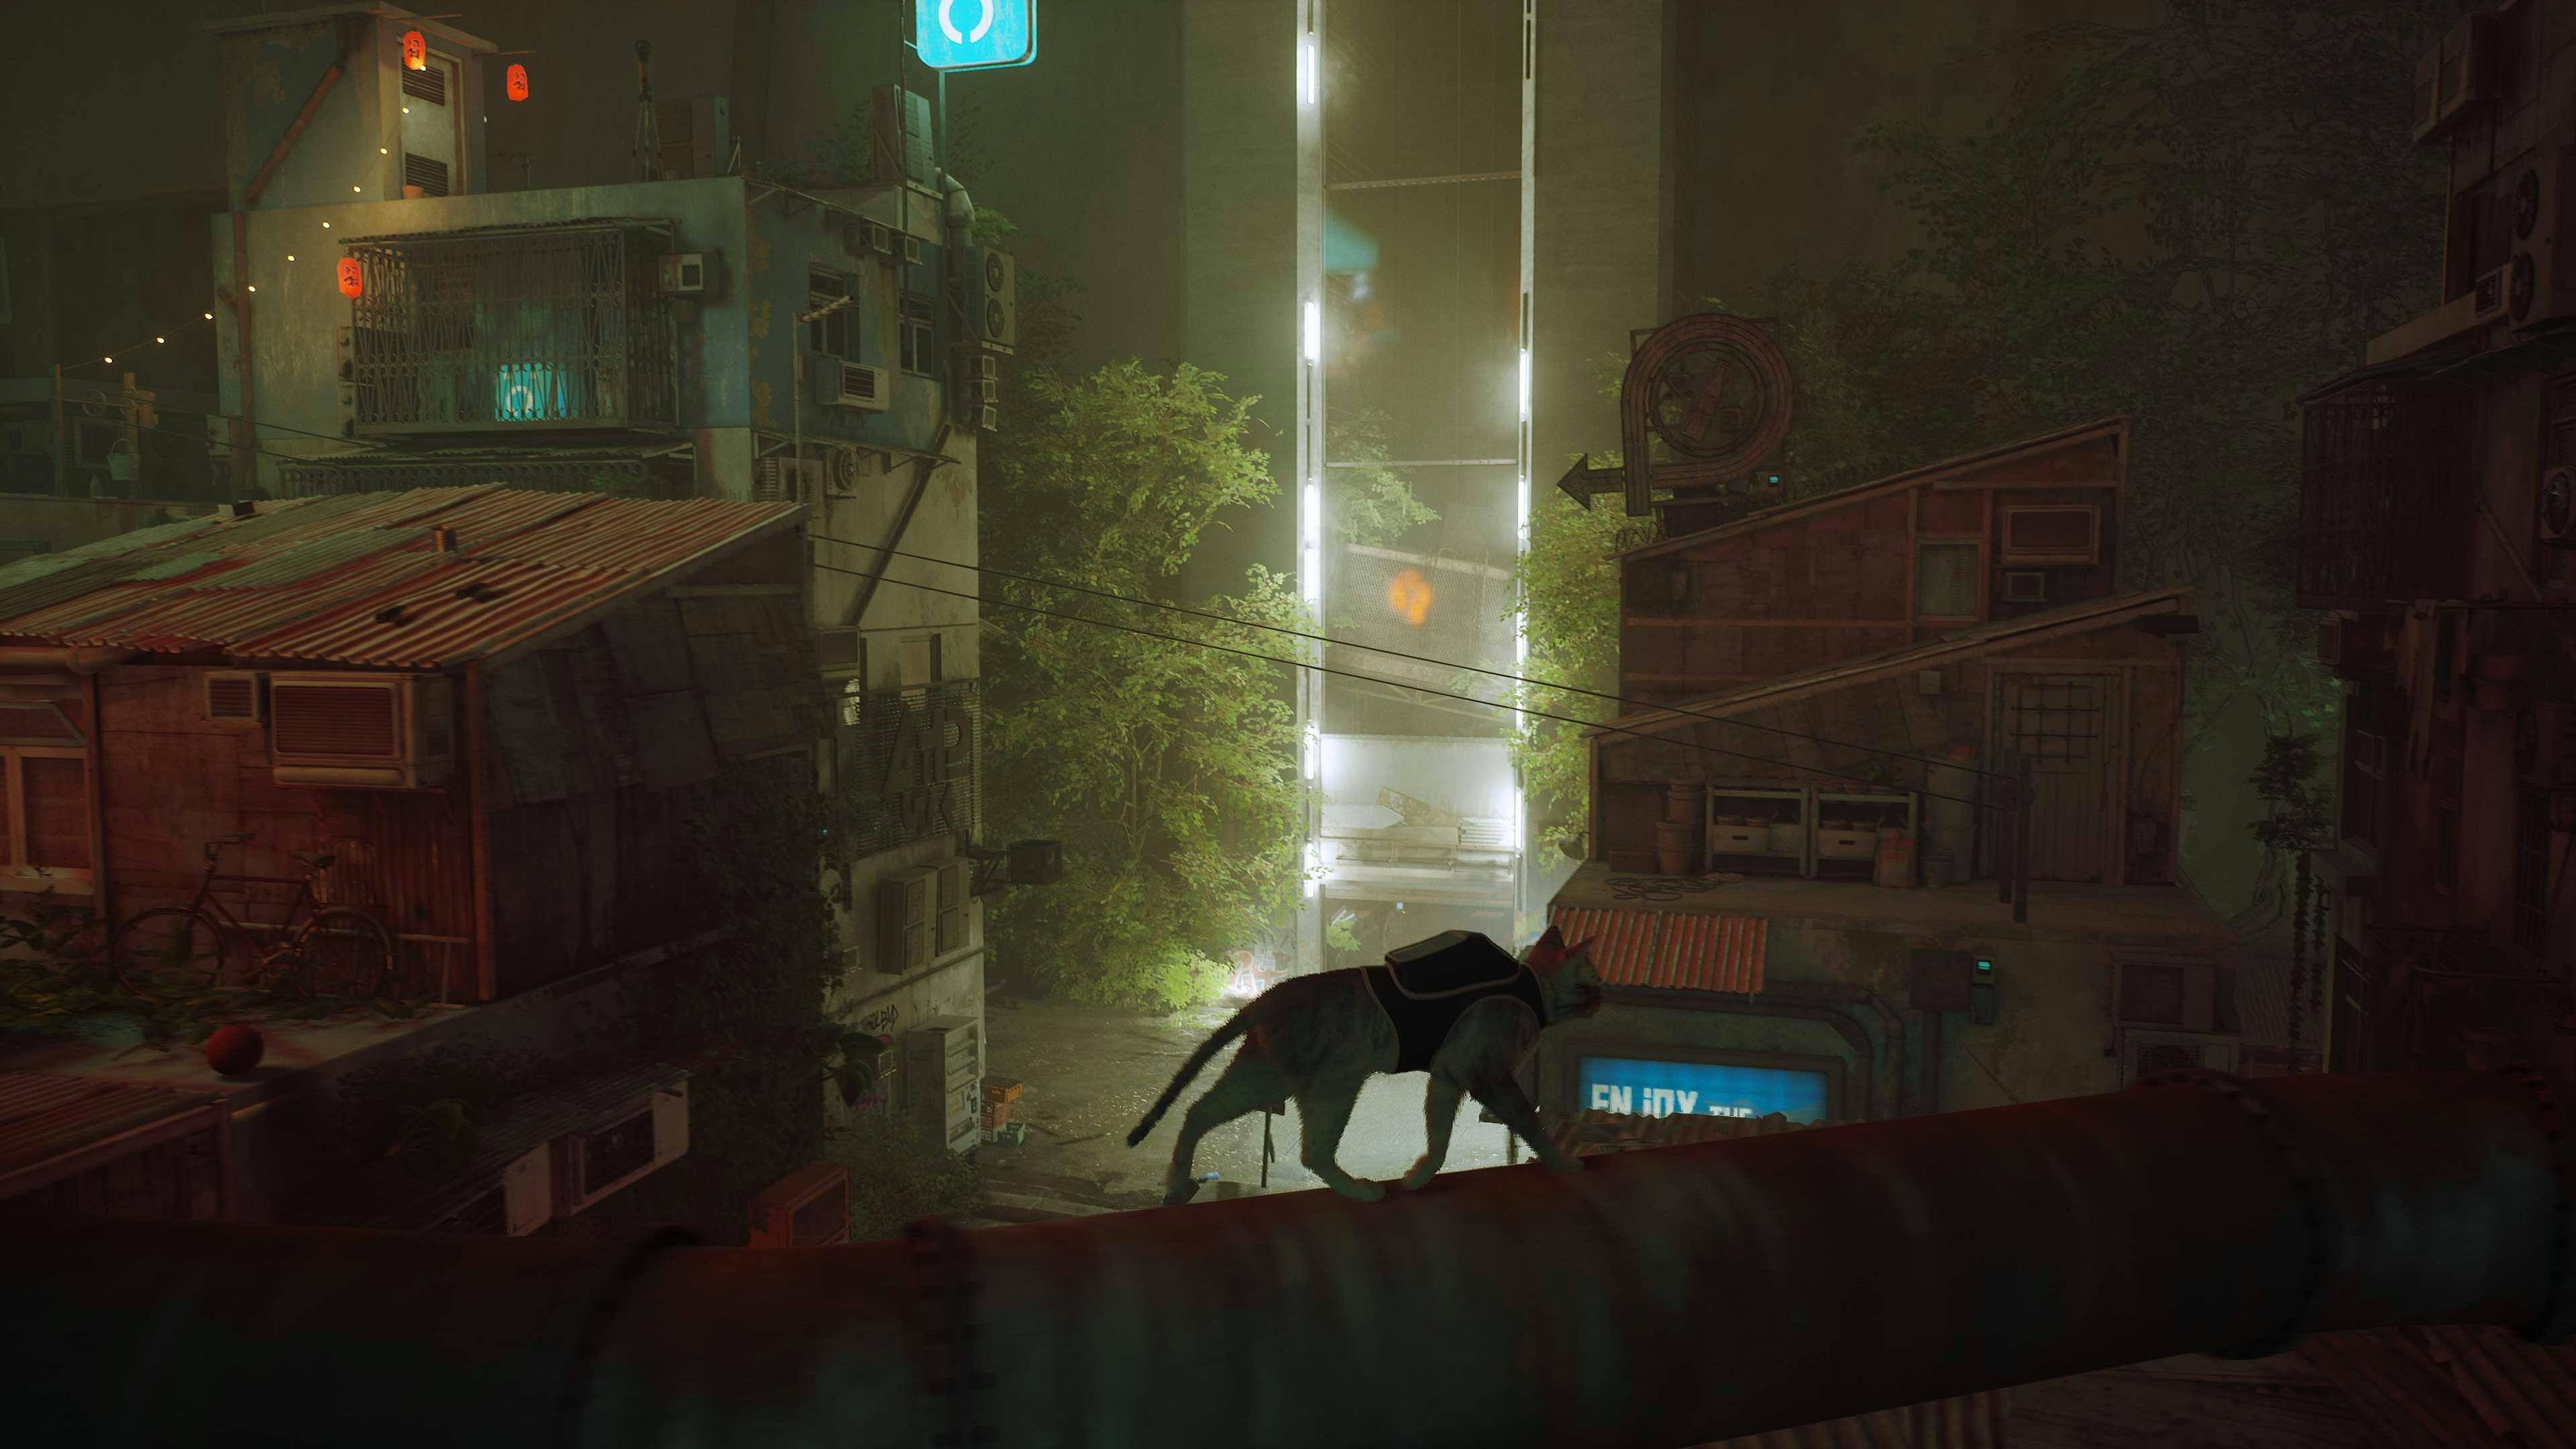 Foreground is shadowy. There's the silhouette of a cat walking across a pipe. In the background are piles of boxes, screens, and some buildings. You can also see bright white lights in background, and a string of red lantern lights off to the left.